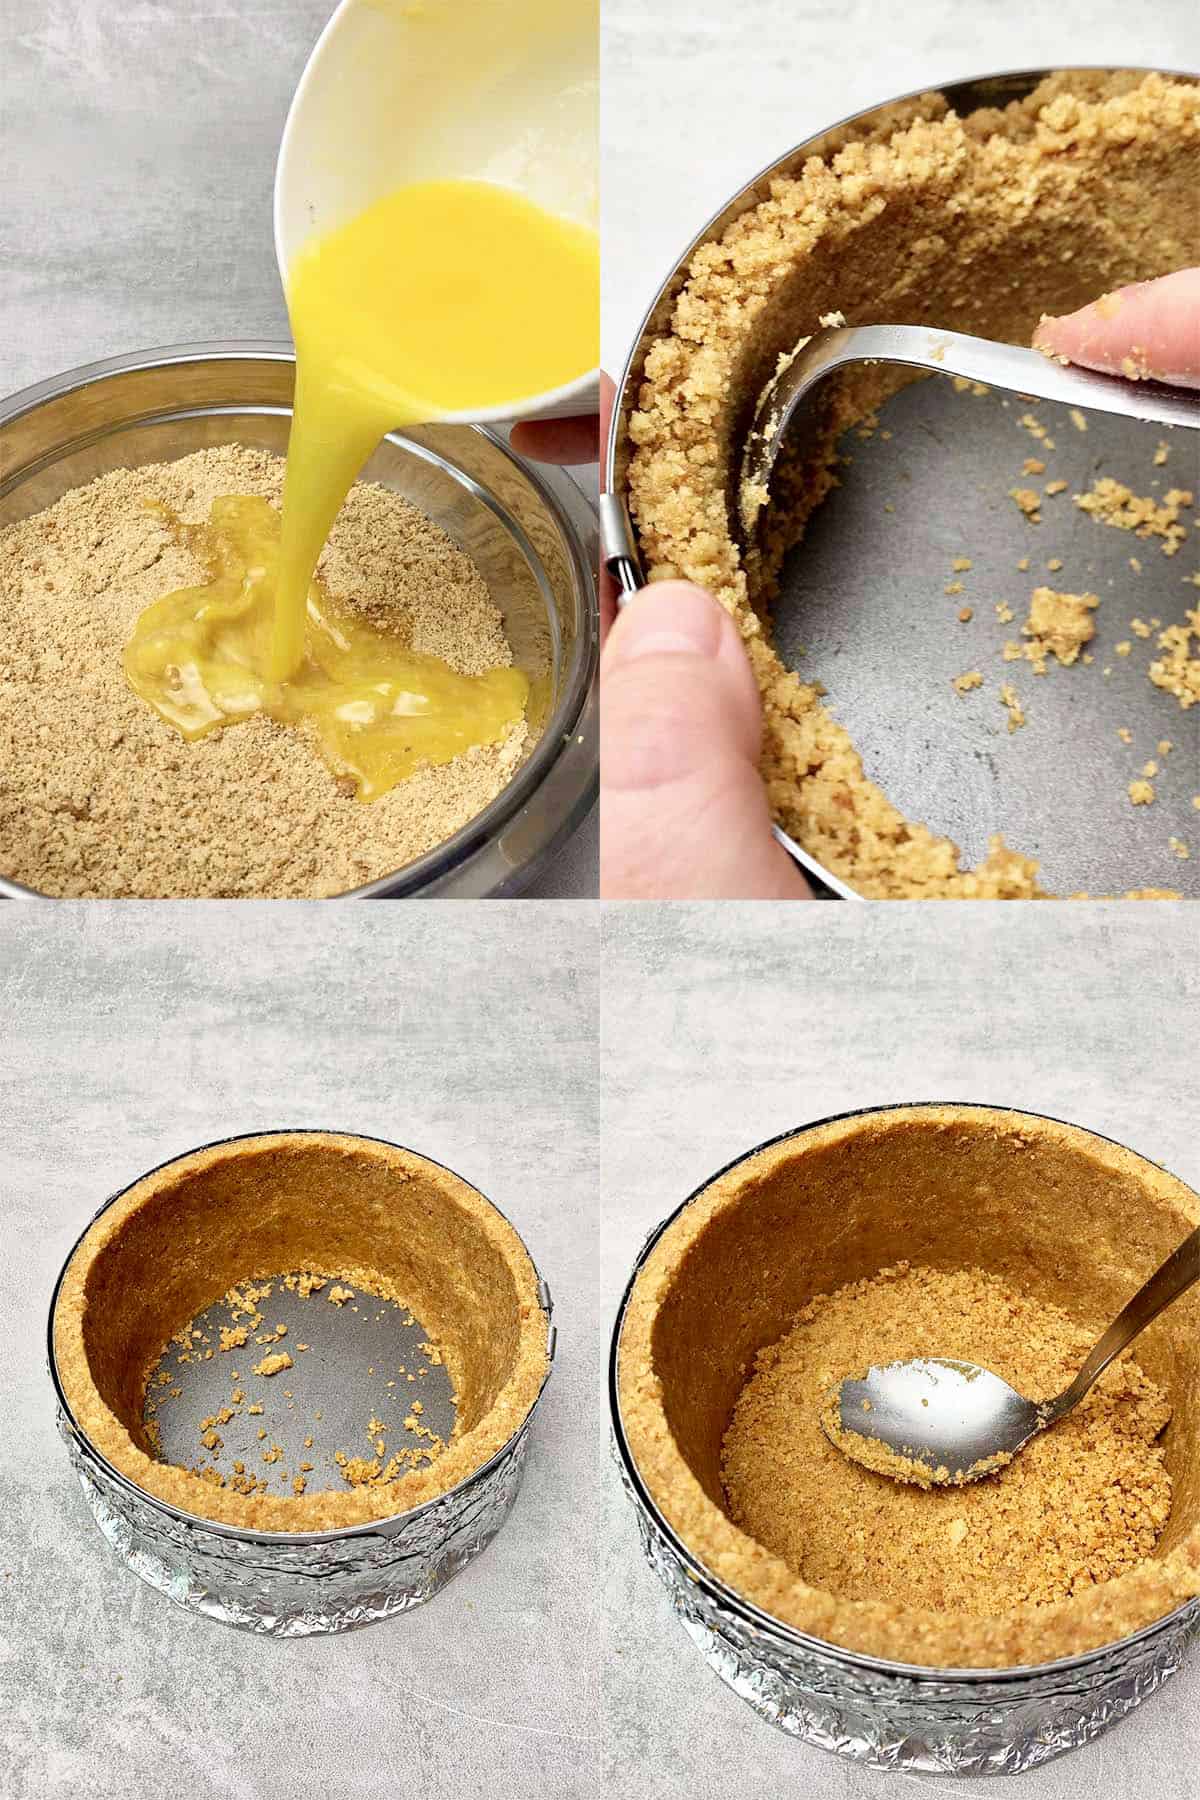 Cheesecake crust assembly process.